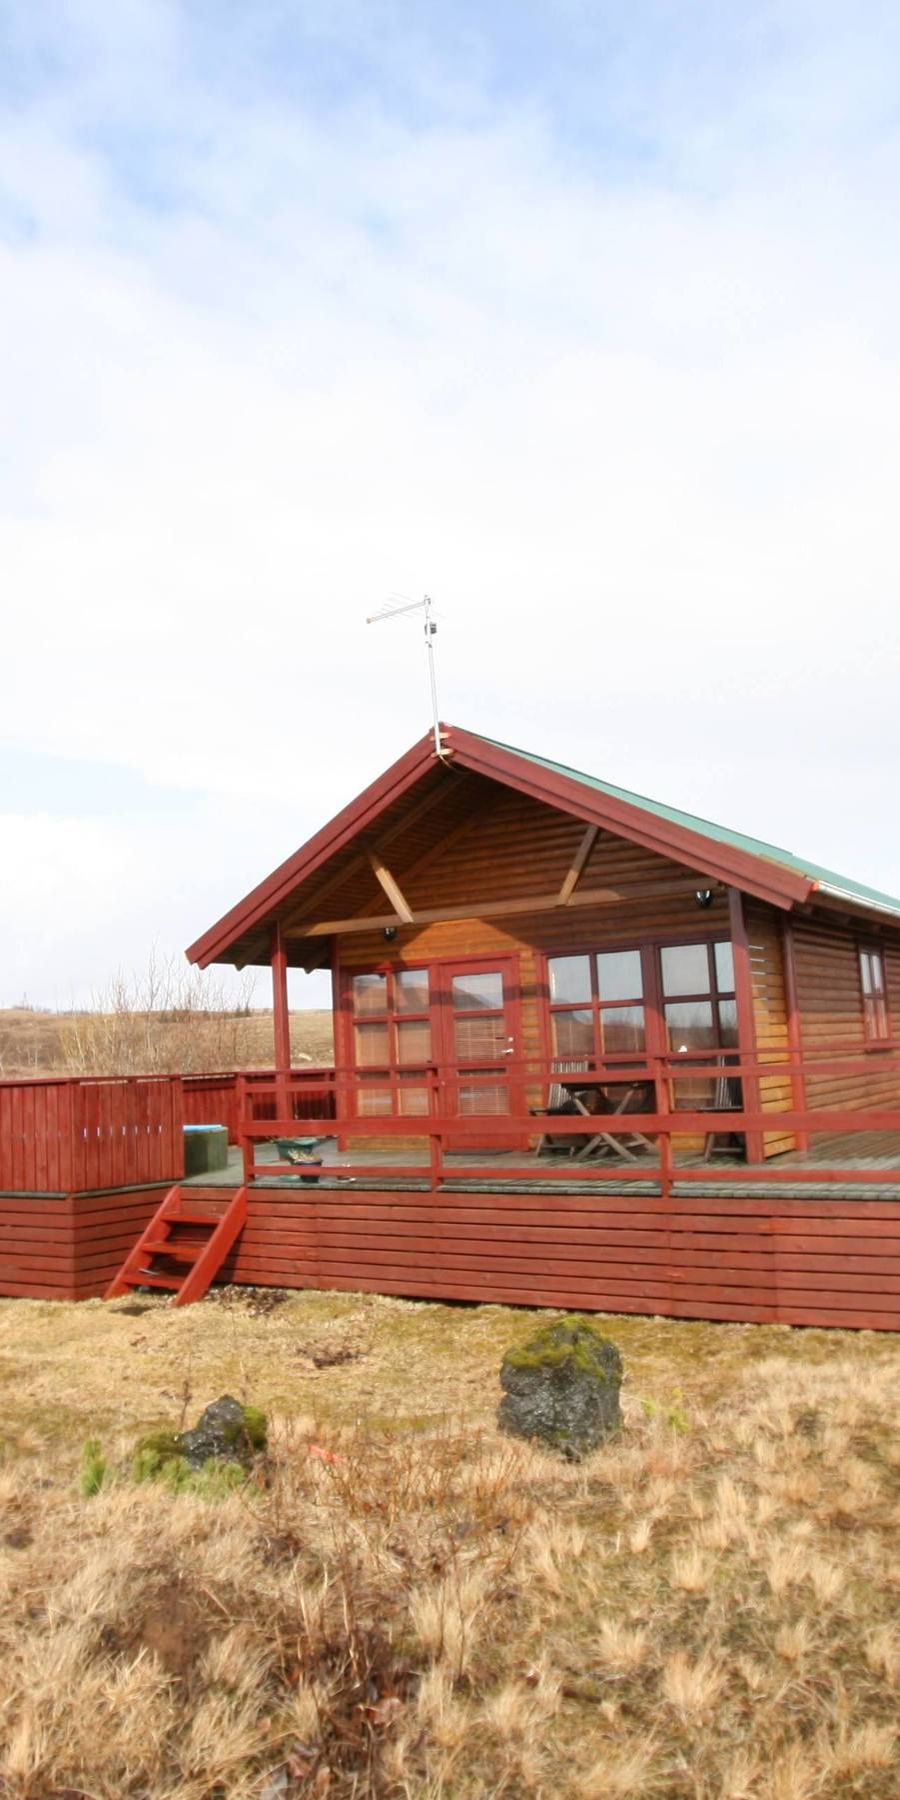 The holiday home is situated in the middle of the southern Icelandic landscape of Þjórsárdalur